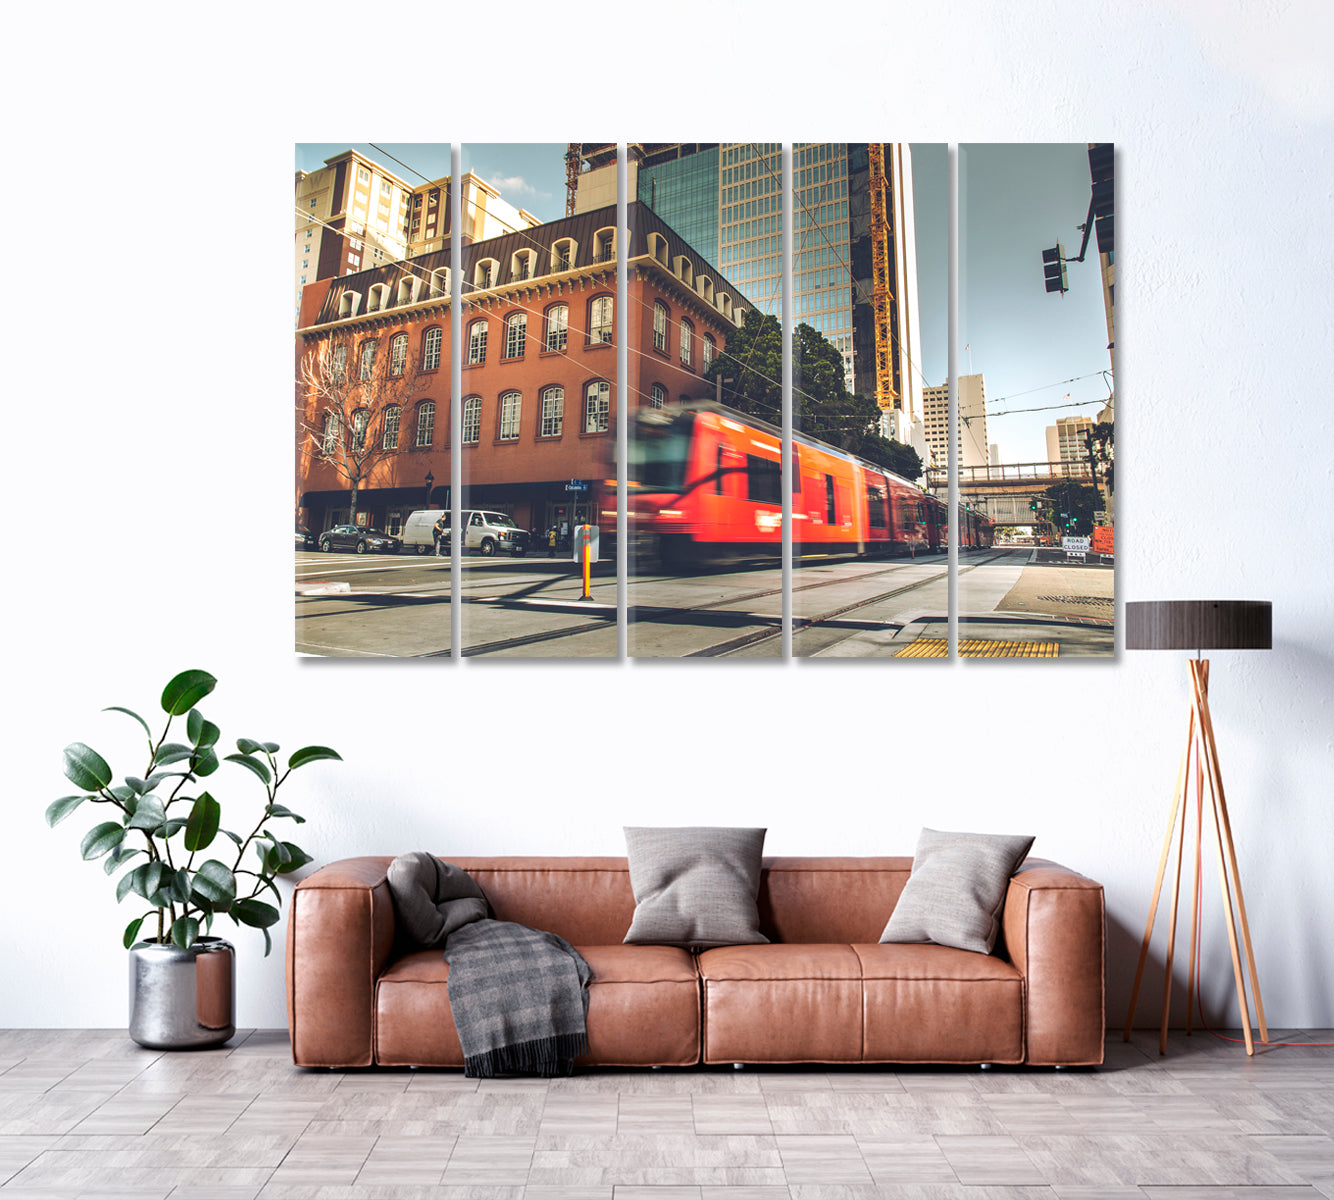 San Diego Downtown with Red Train Canvas Print ArtLexy 5 Panels 36"x24" inches 